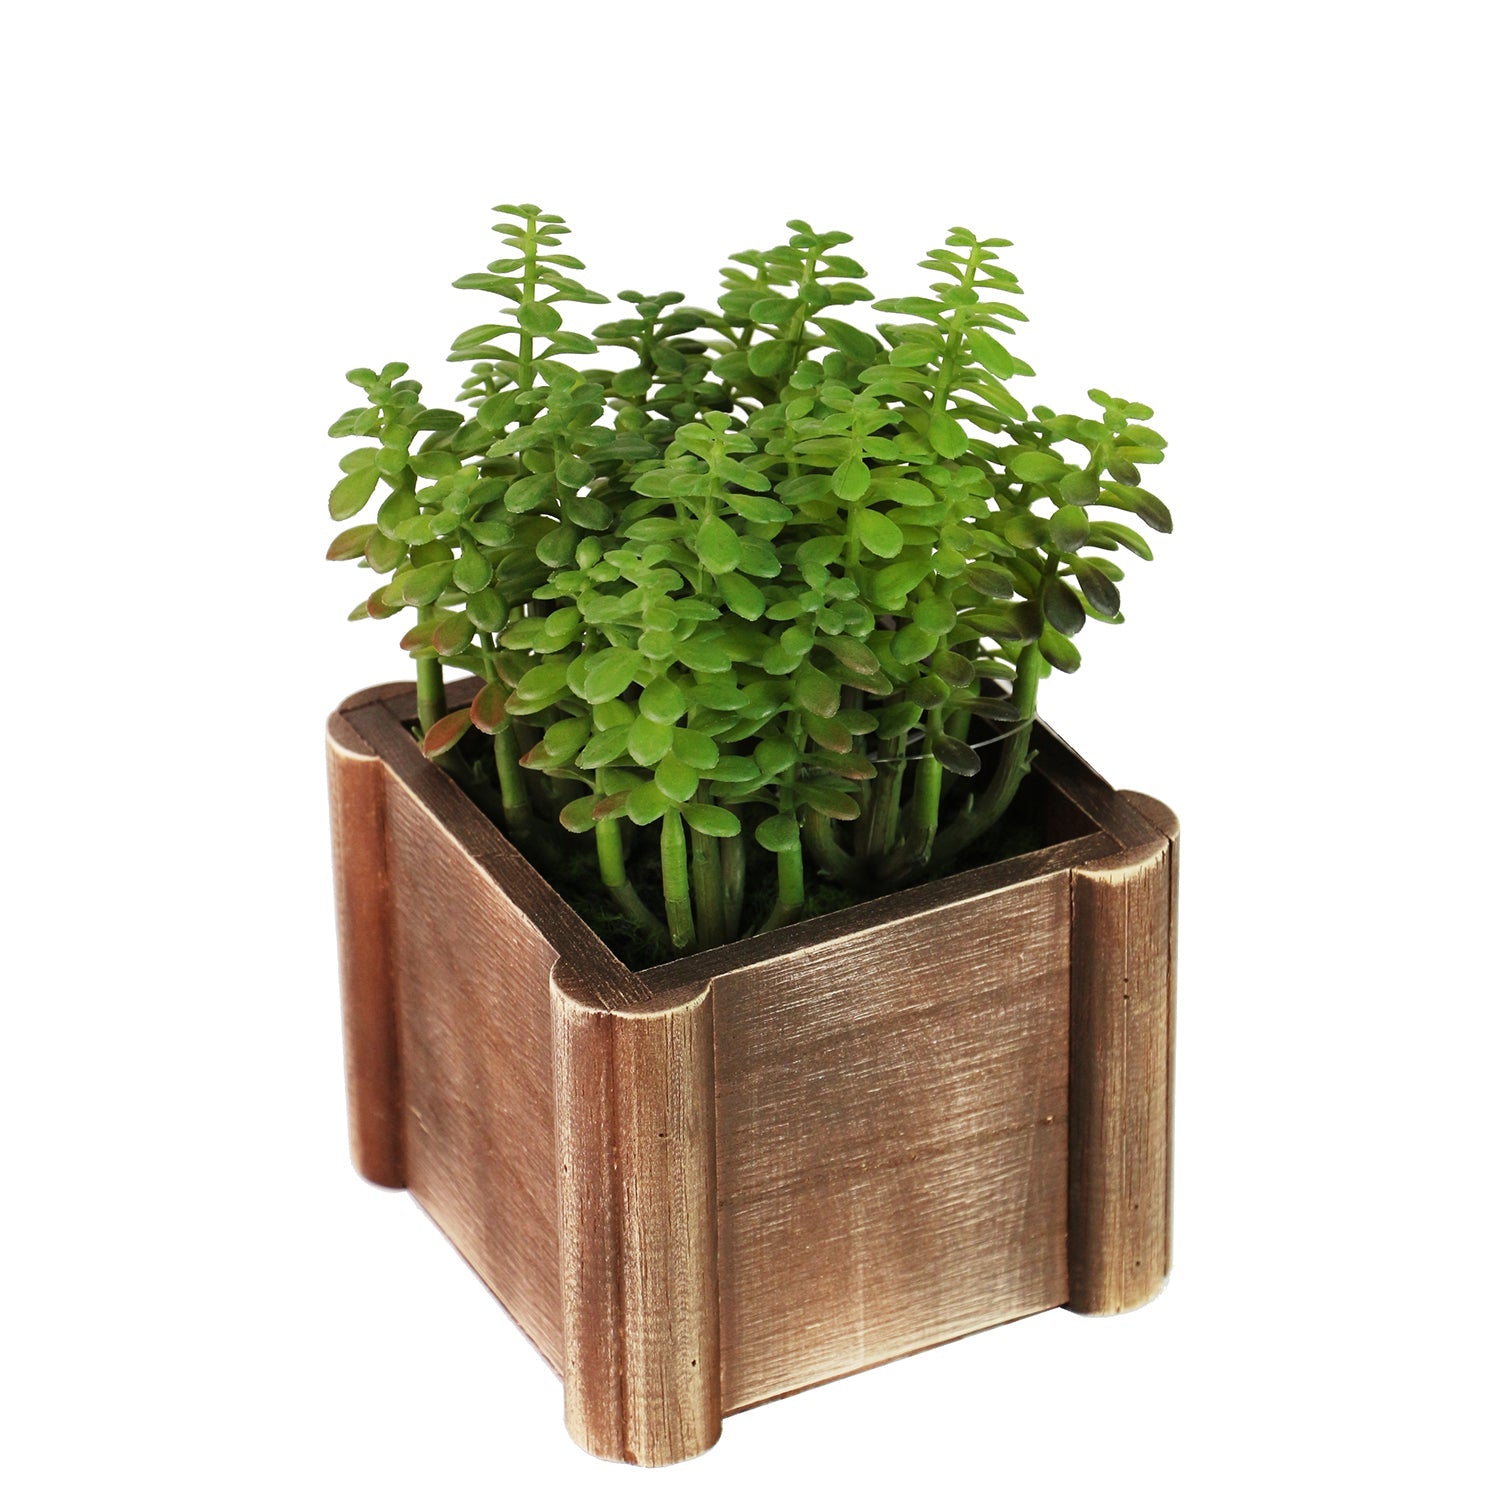 Blossom Lifelike Plant in Rustic Wooden Pot